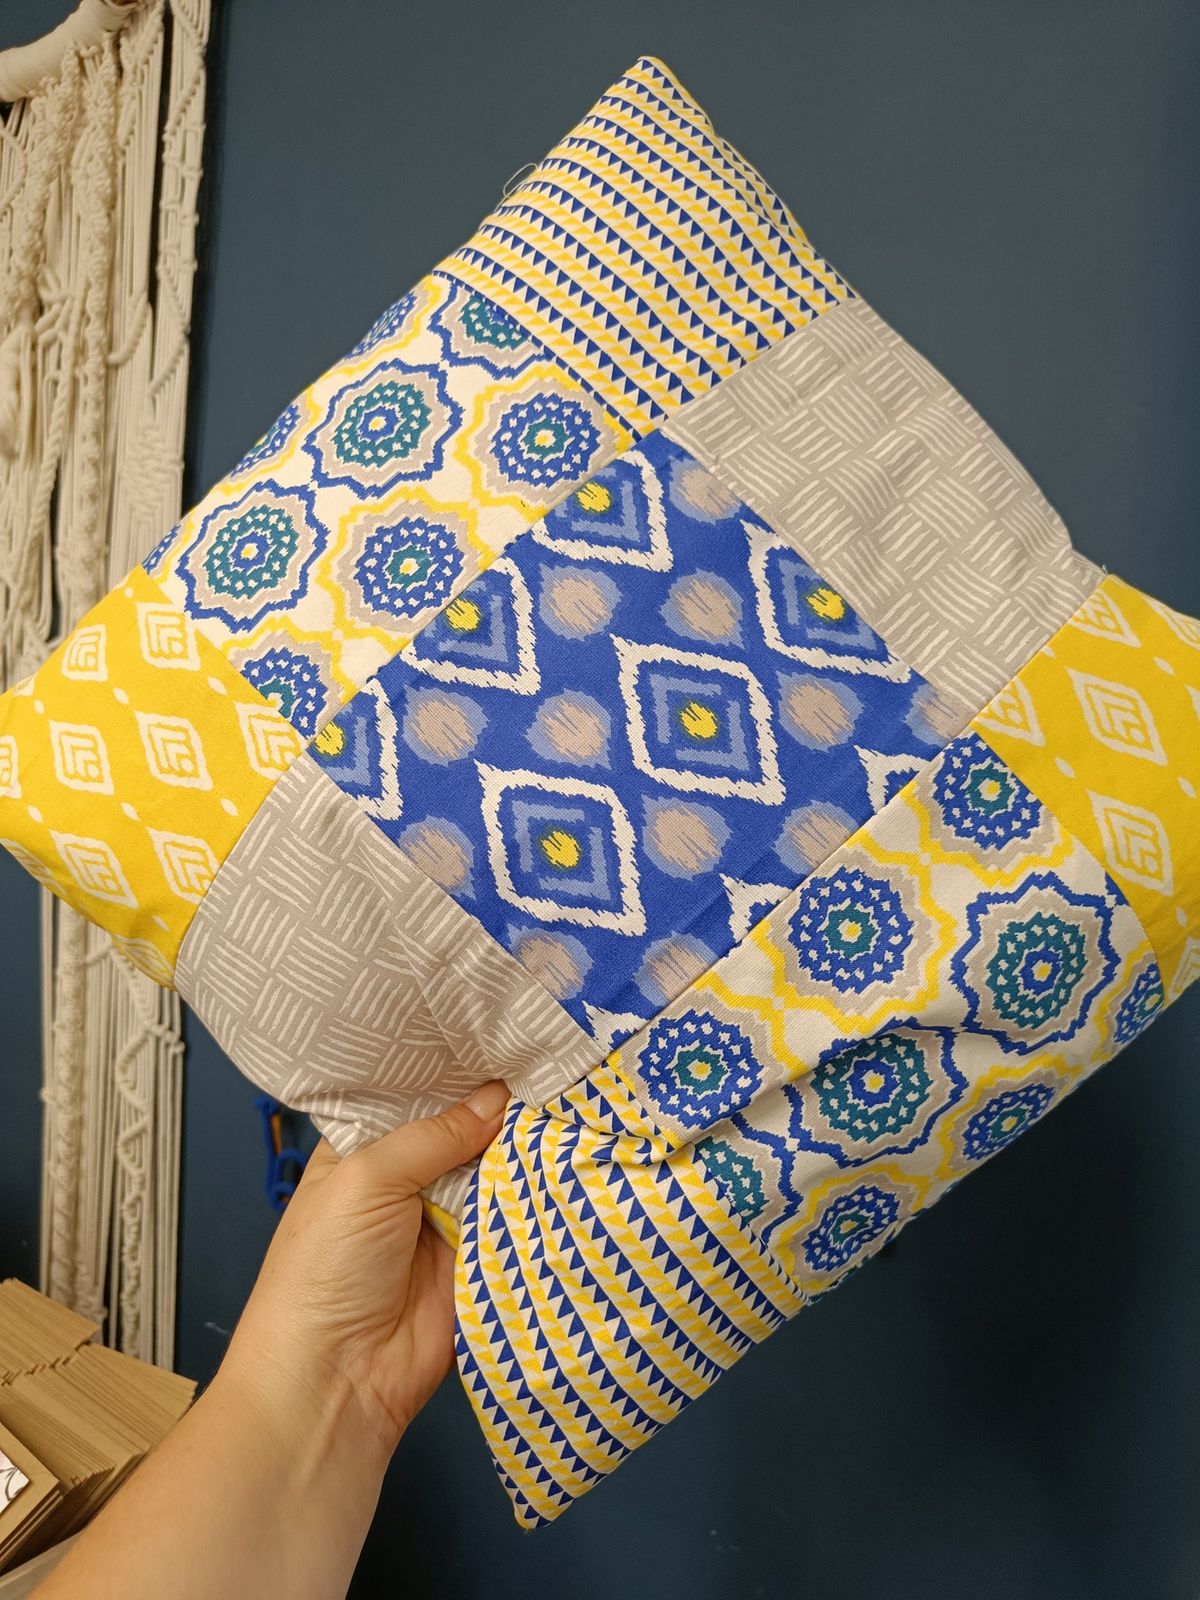 Beginners Sewing - Patchwork cushion or Bunting